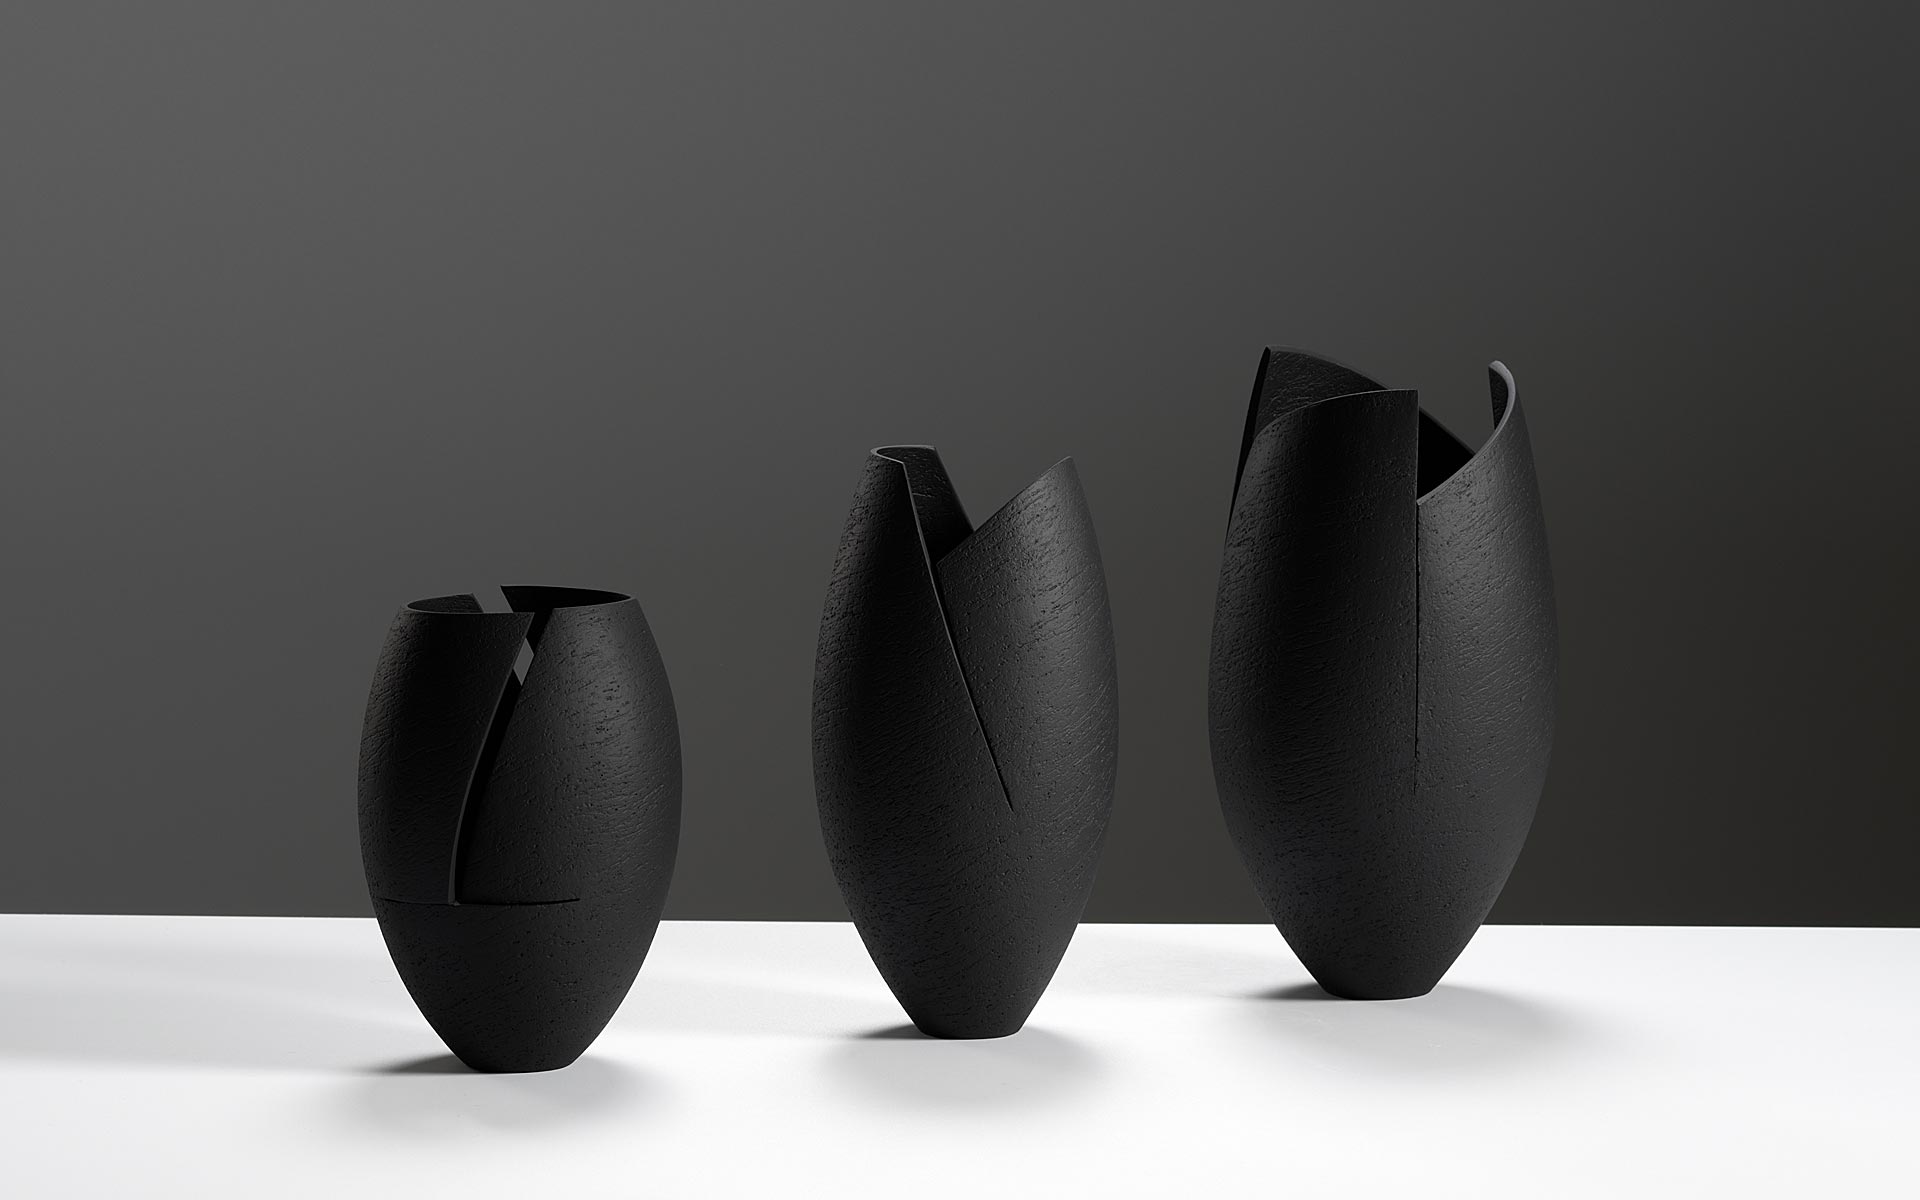 Group of black cut and altered vessels